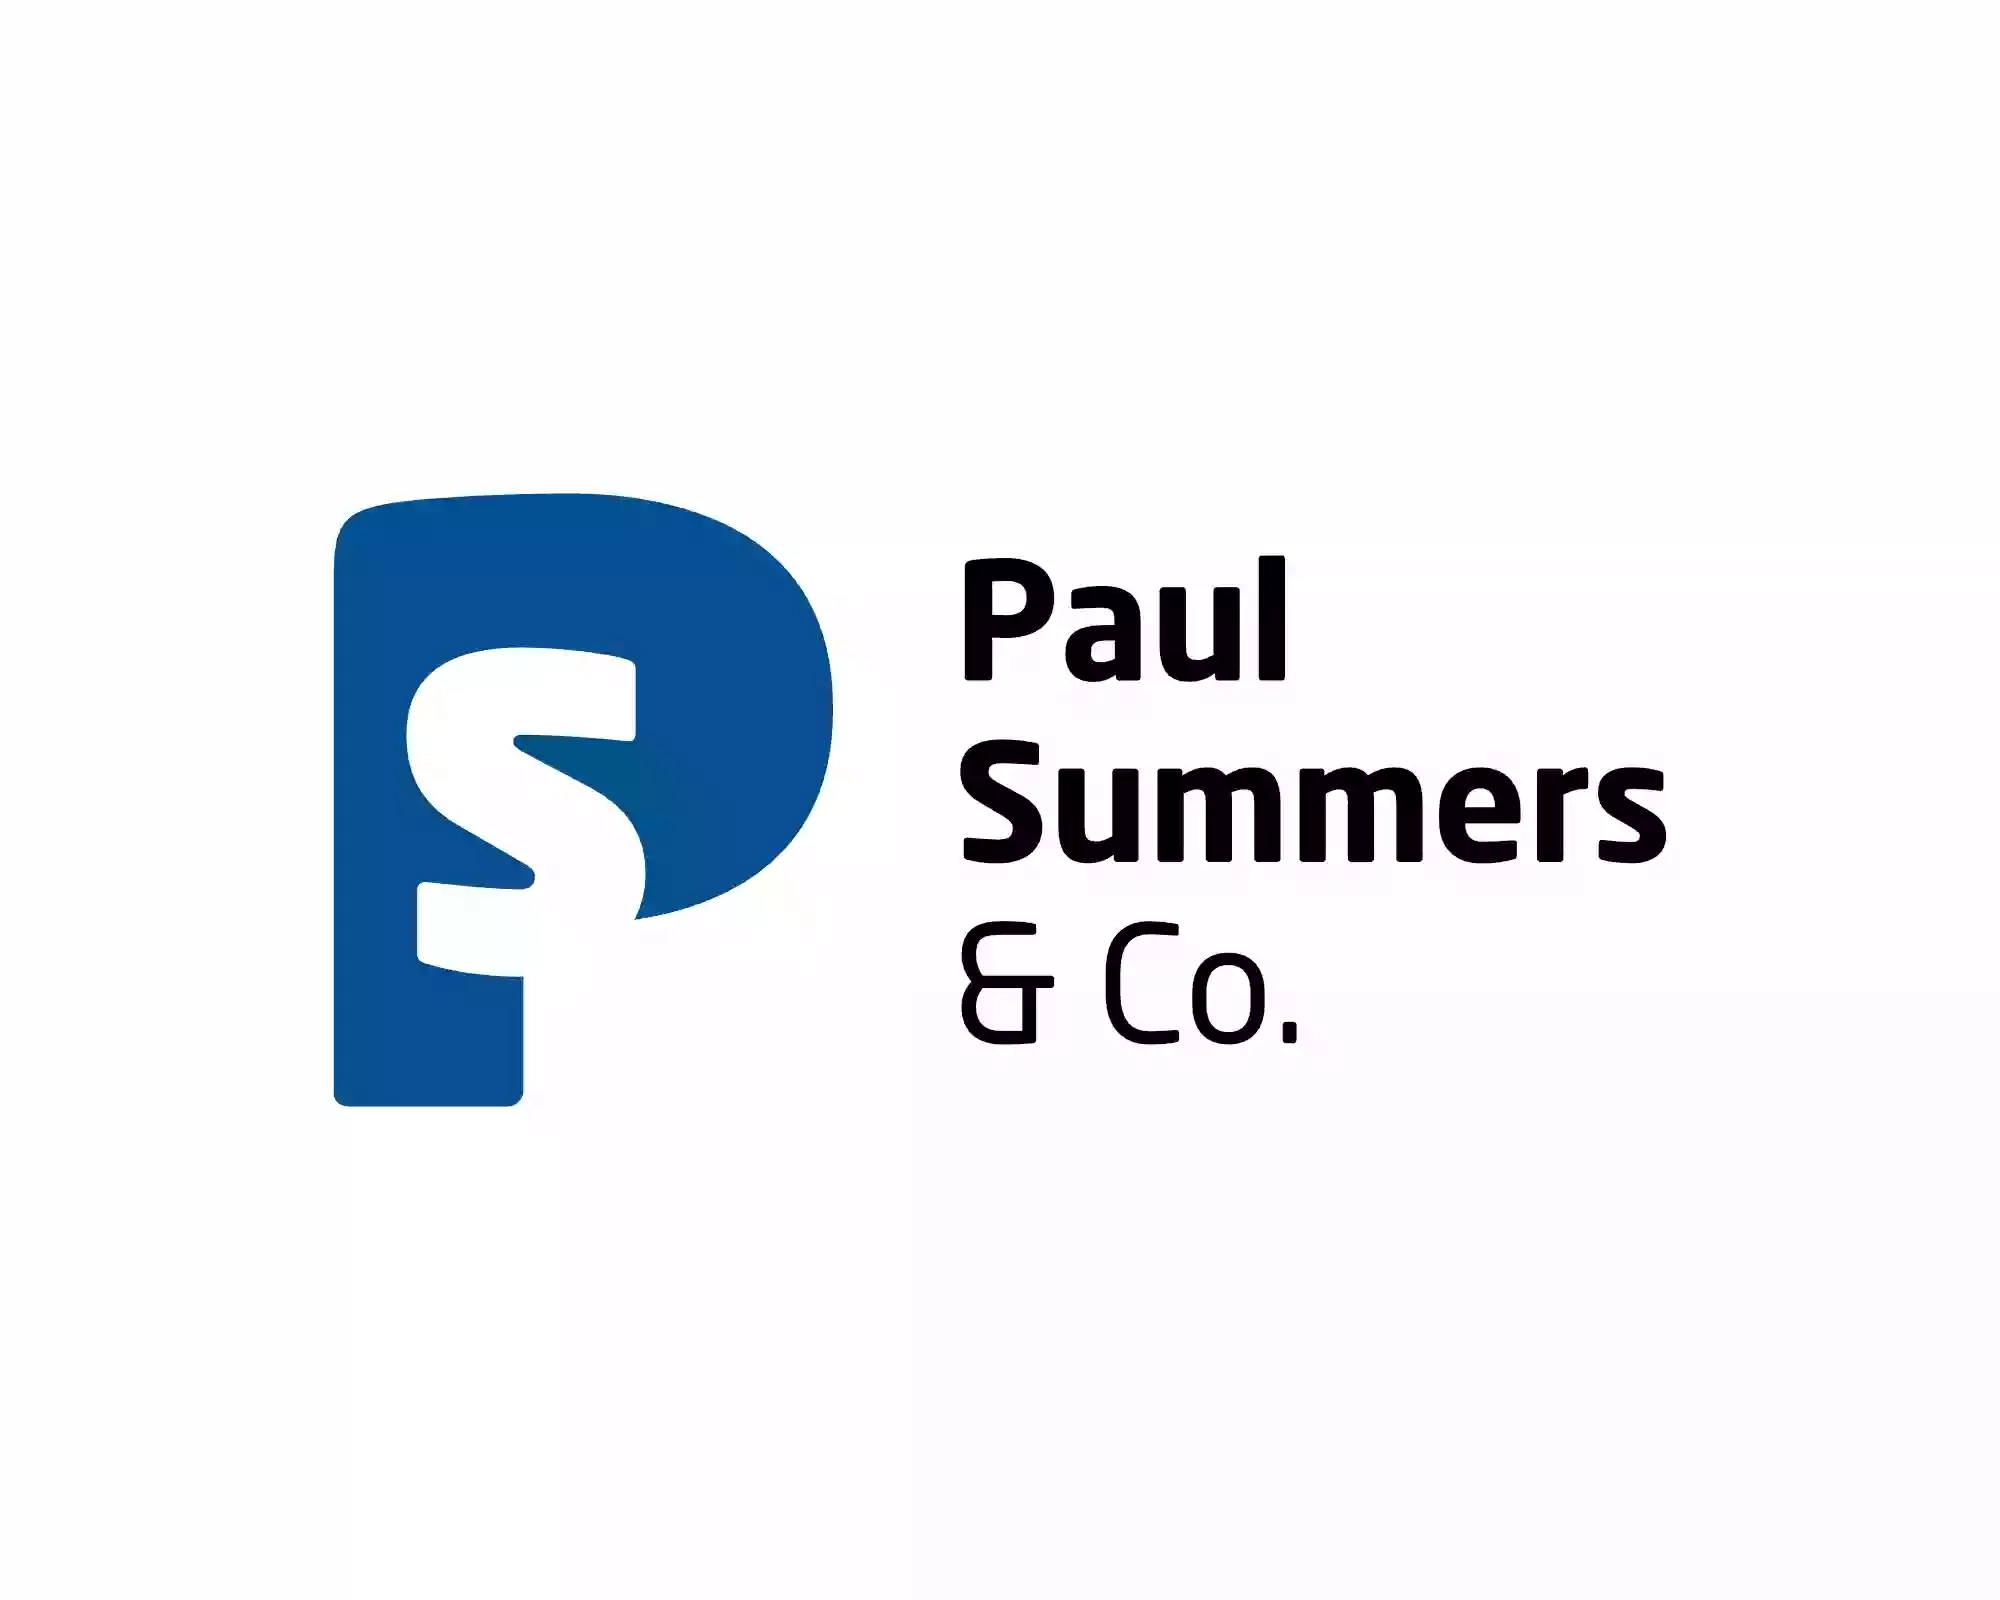 Paul Summers & Co